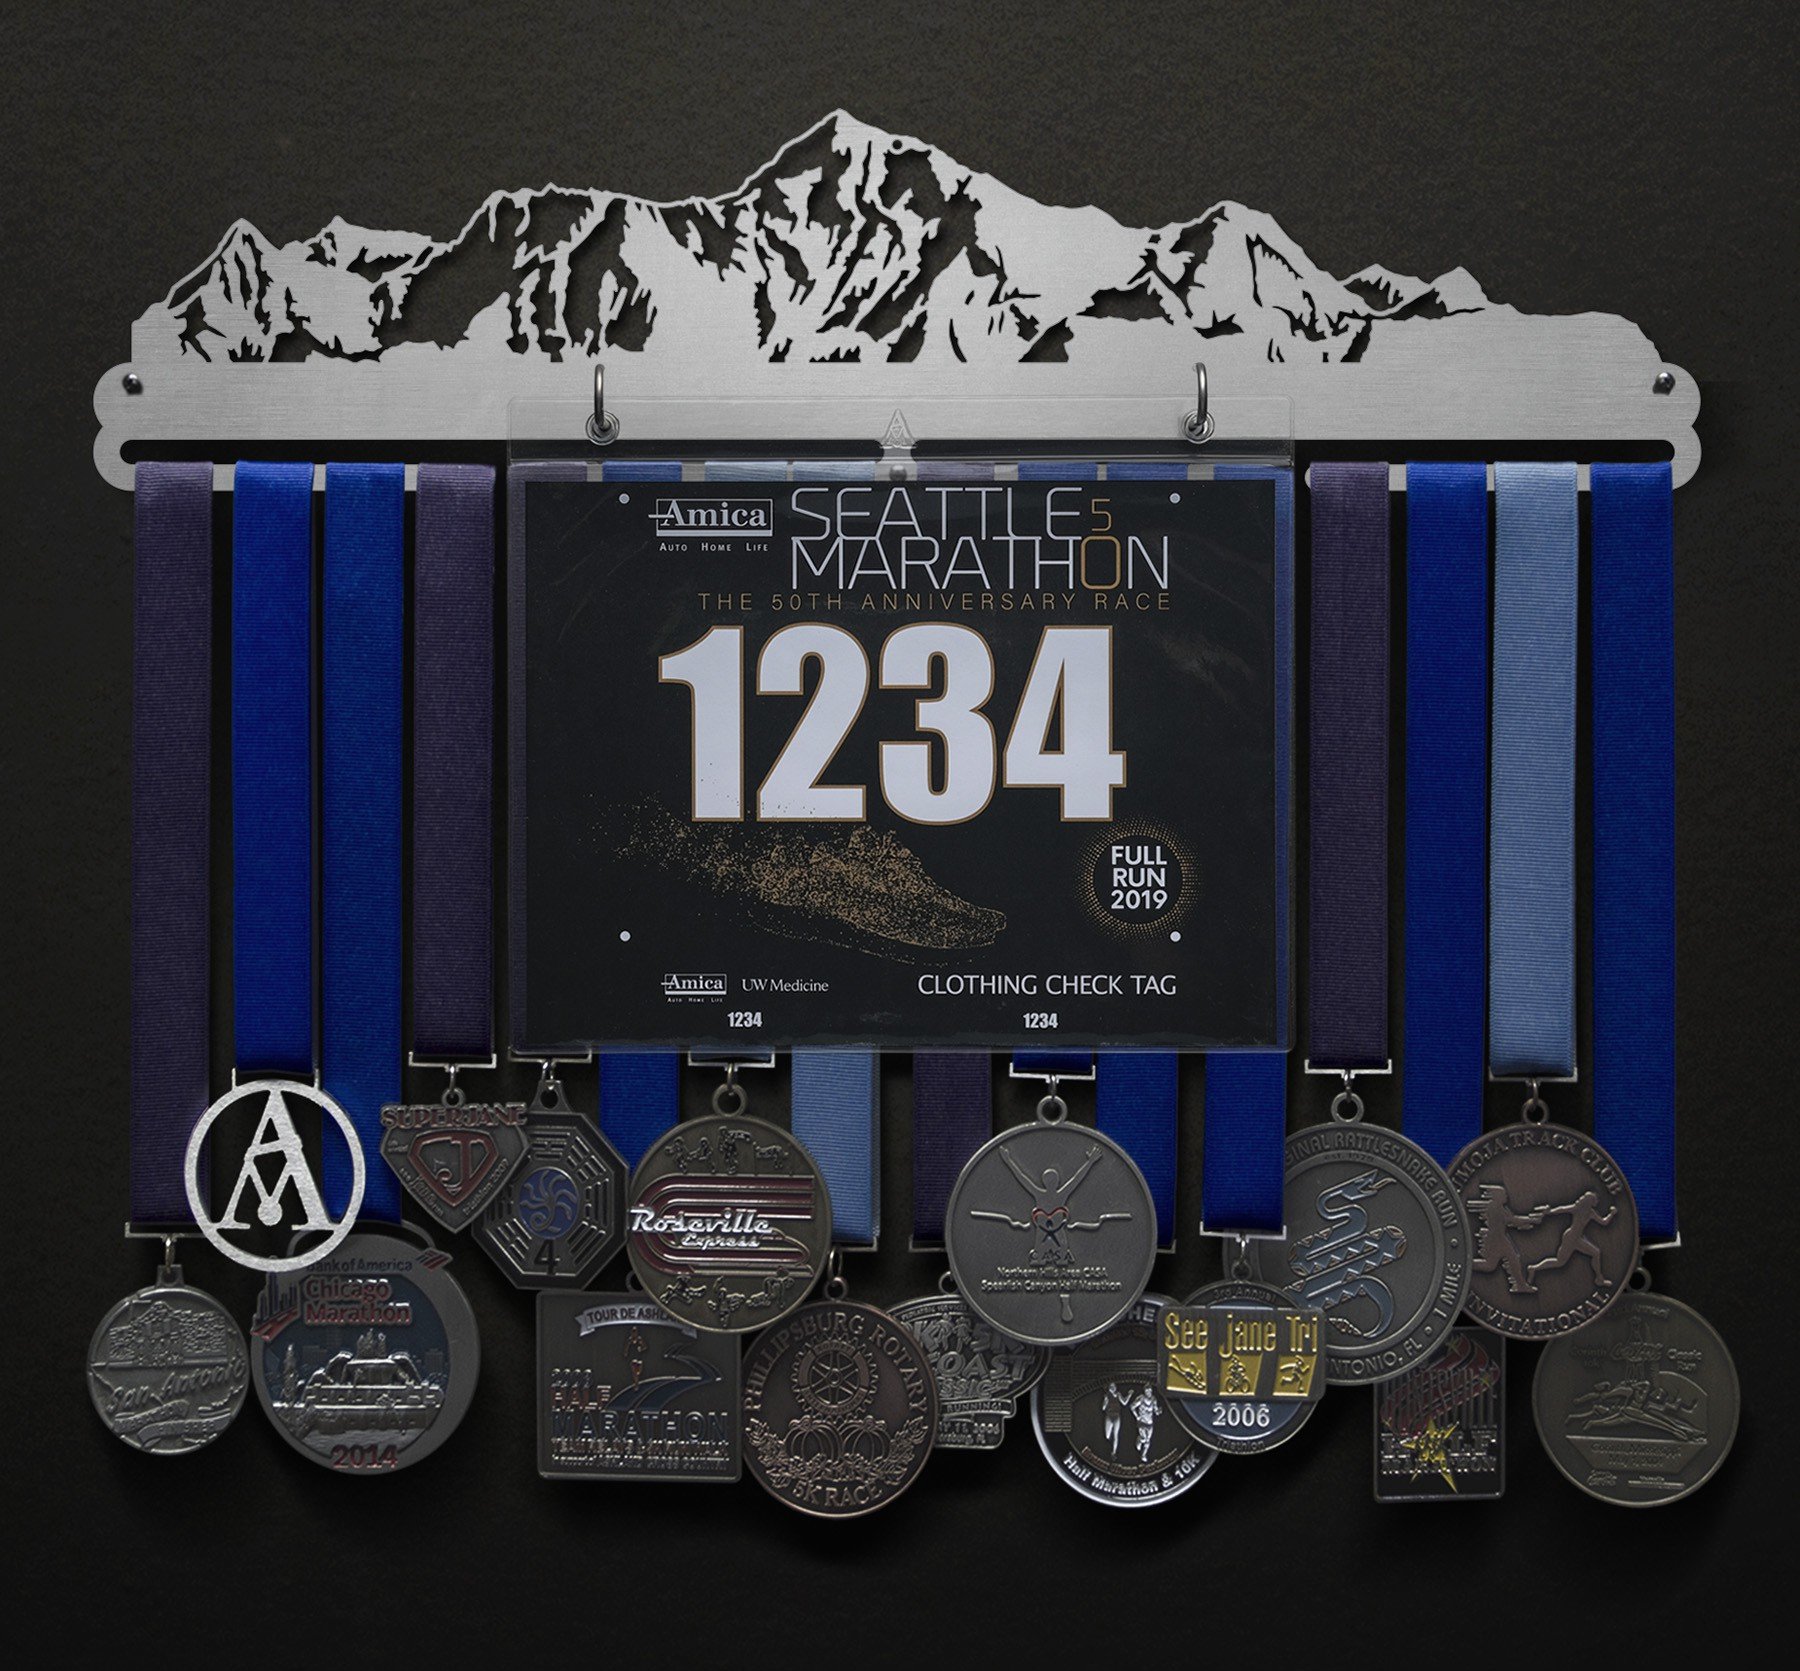 Mountainscape - No Figure - Version 2 Bib and Medal Display